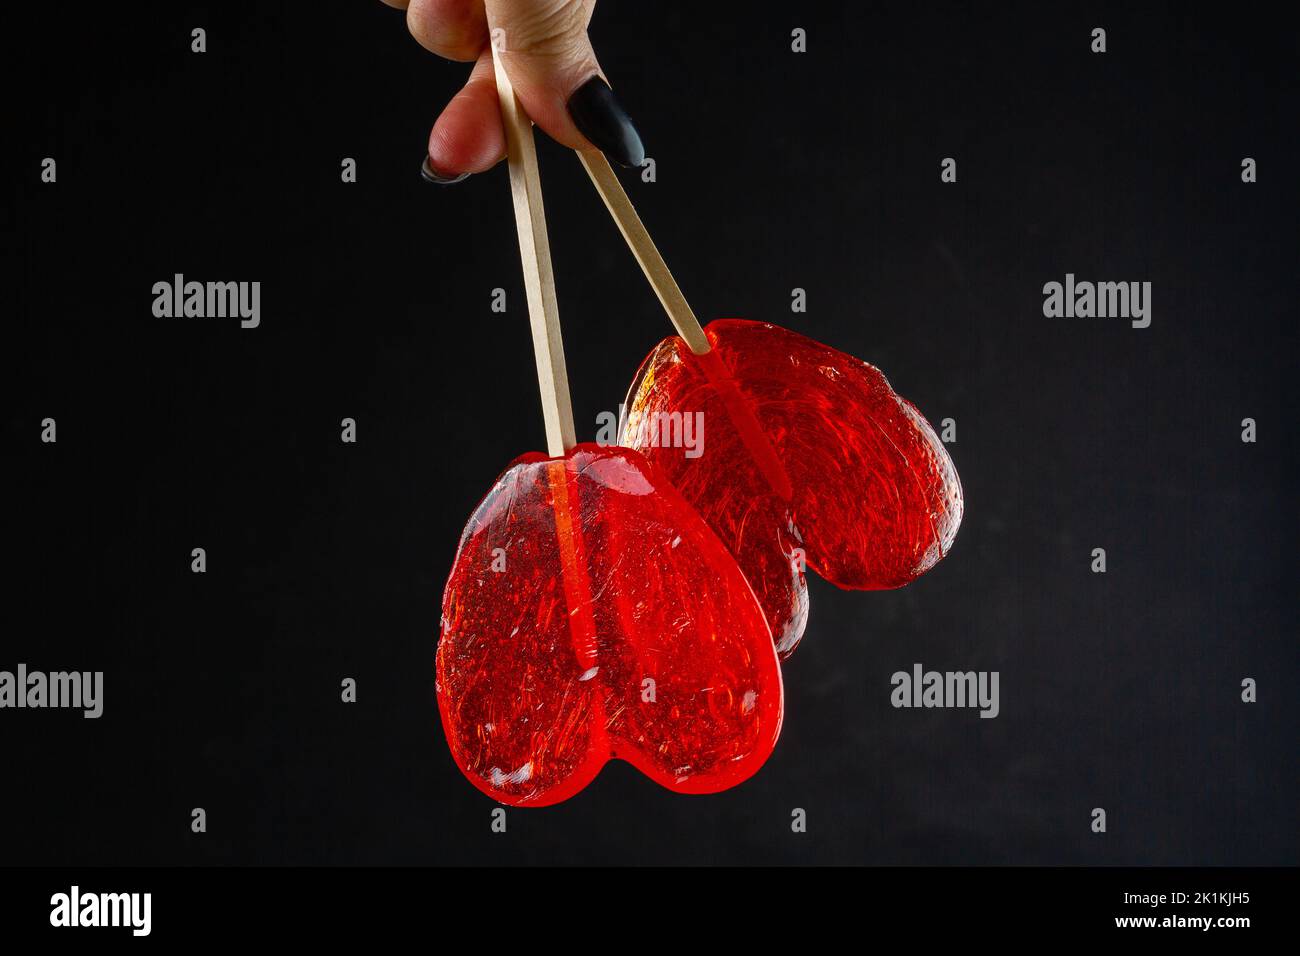 Hand holding red heart candies on black background. Pair of sweet lollipops. Stock Photo